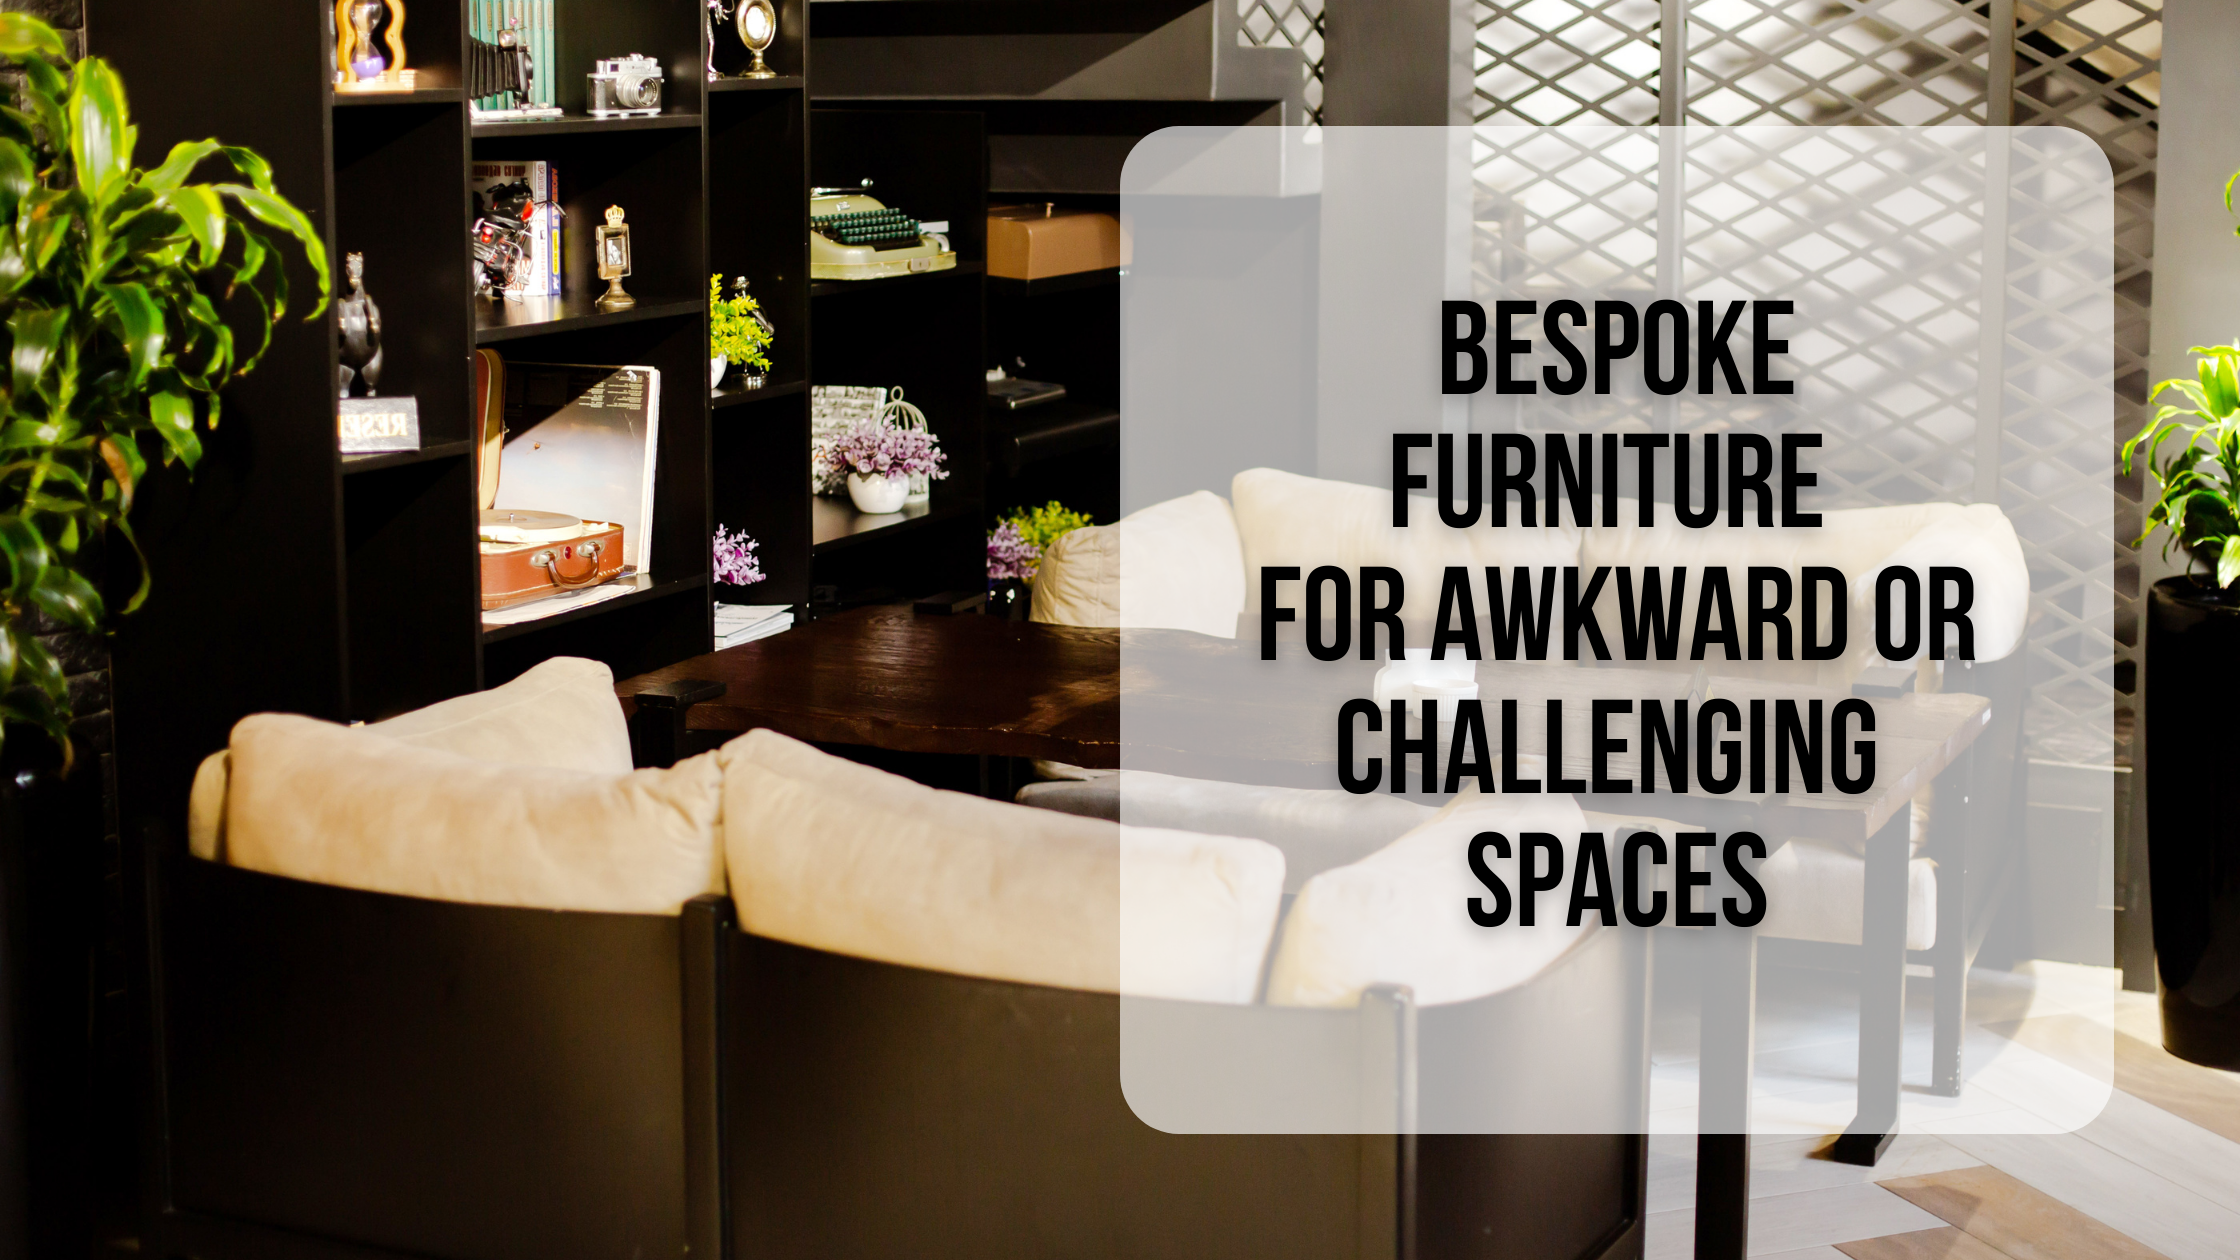 Bespoke furniture for awkward or challenging spaces